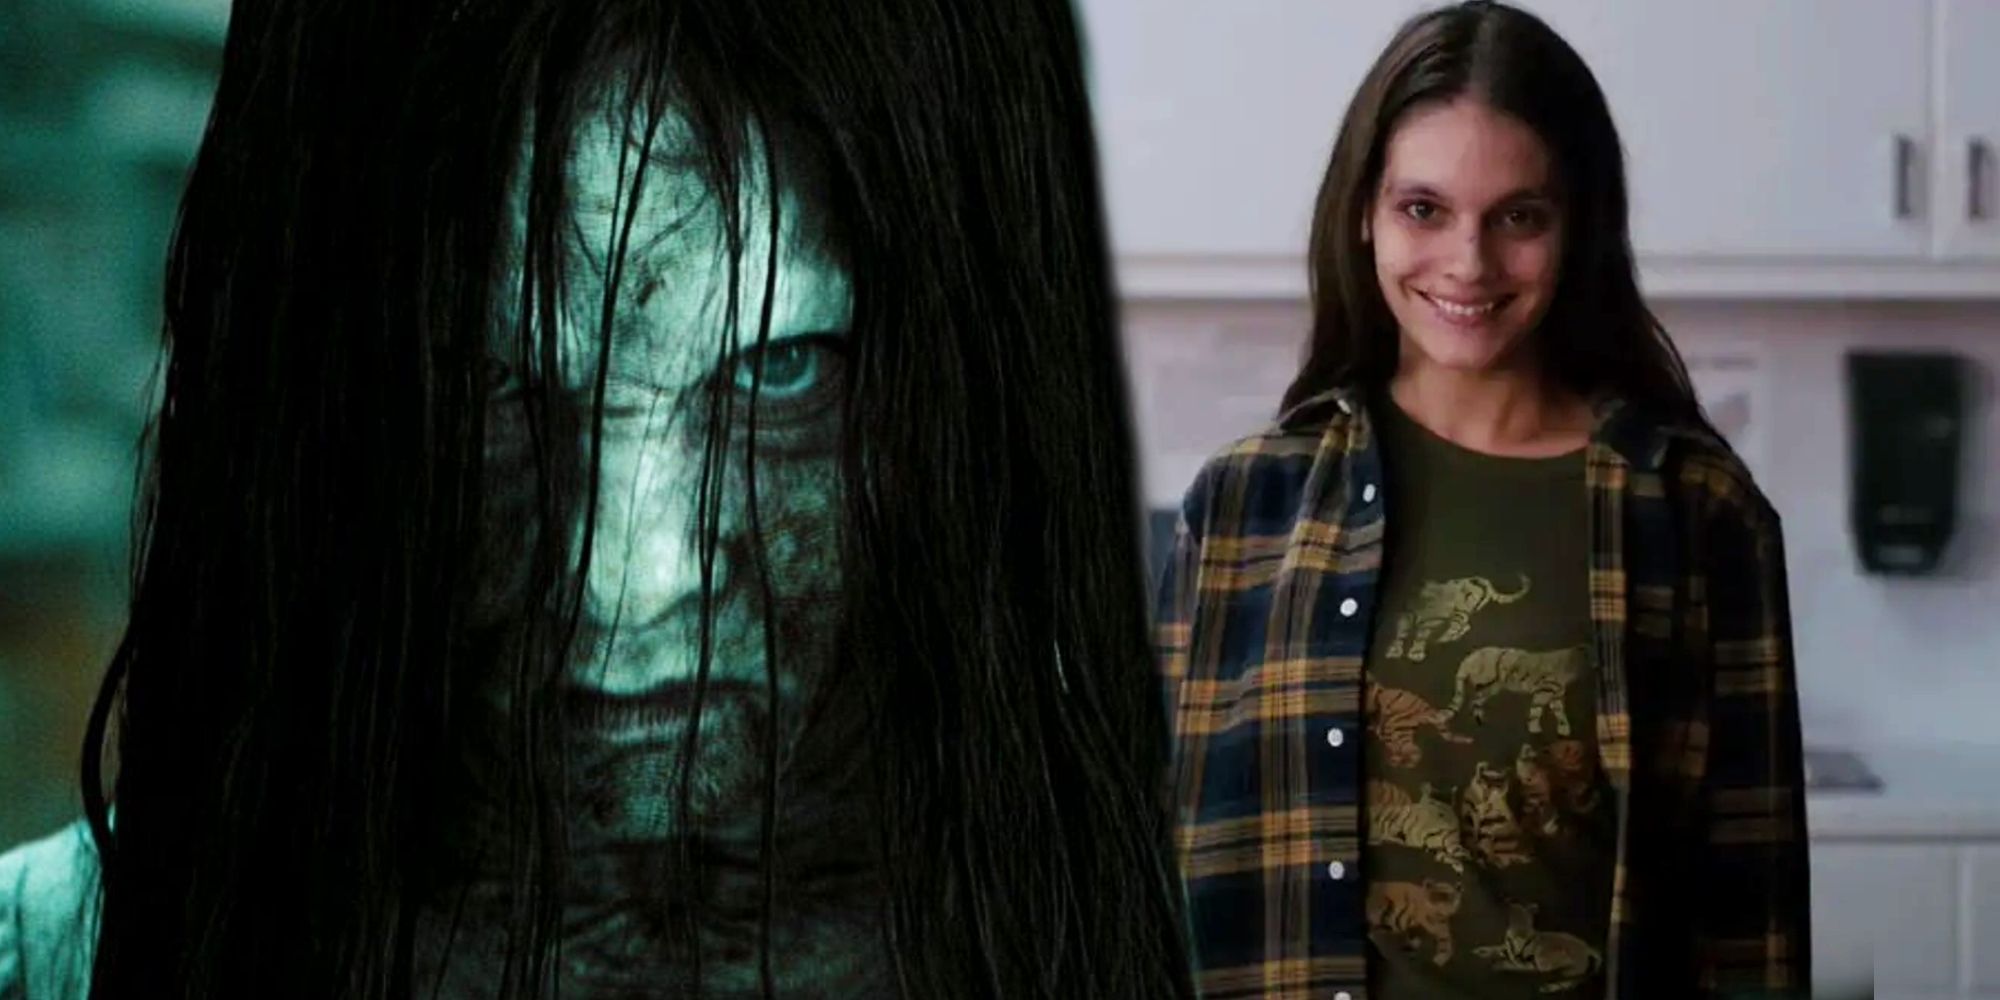 Rings' movie review: Slow-moving story sinks this horror sequel |  Globalnews.ca